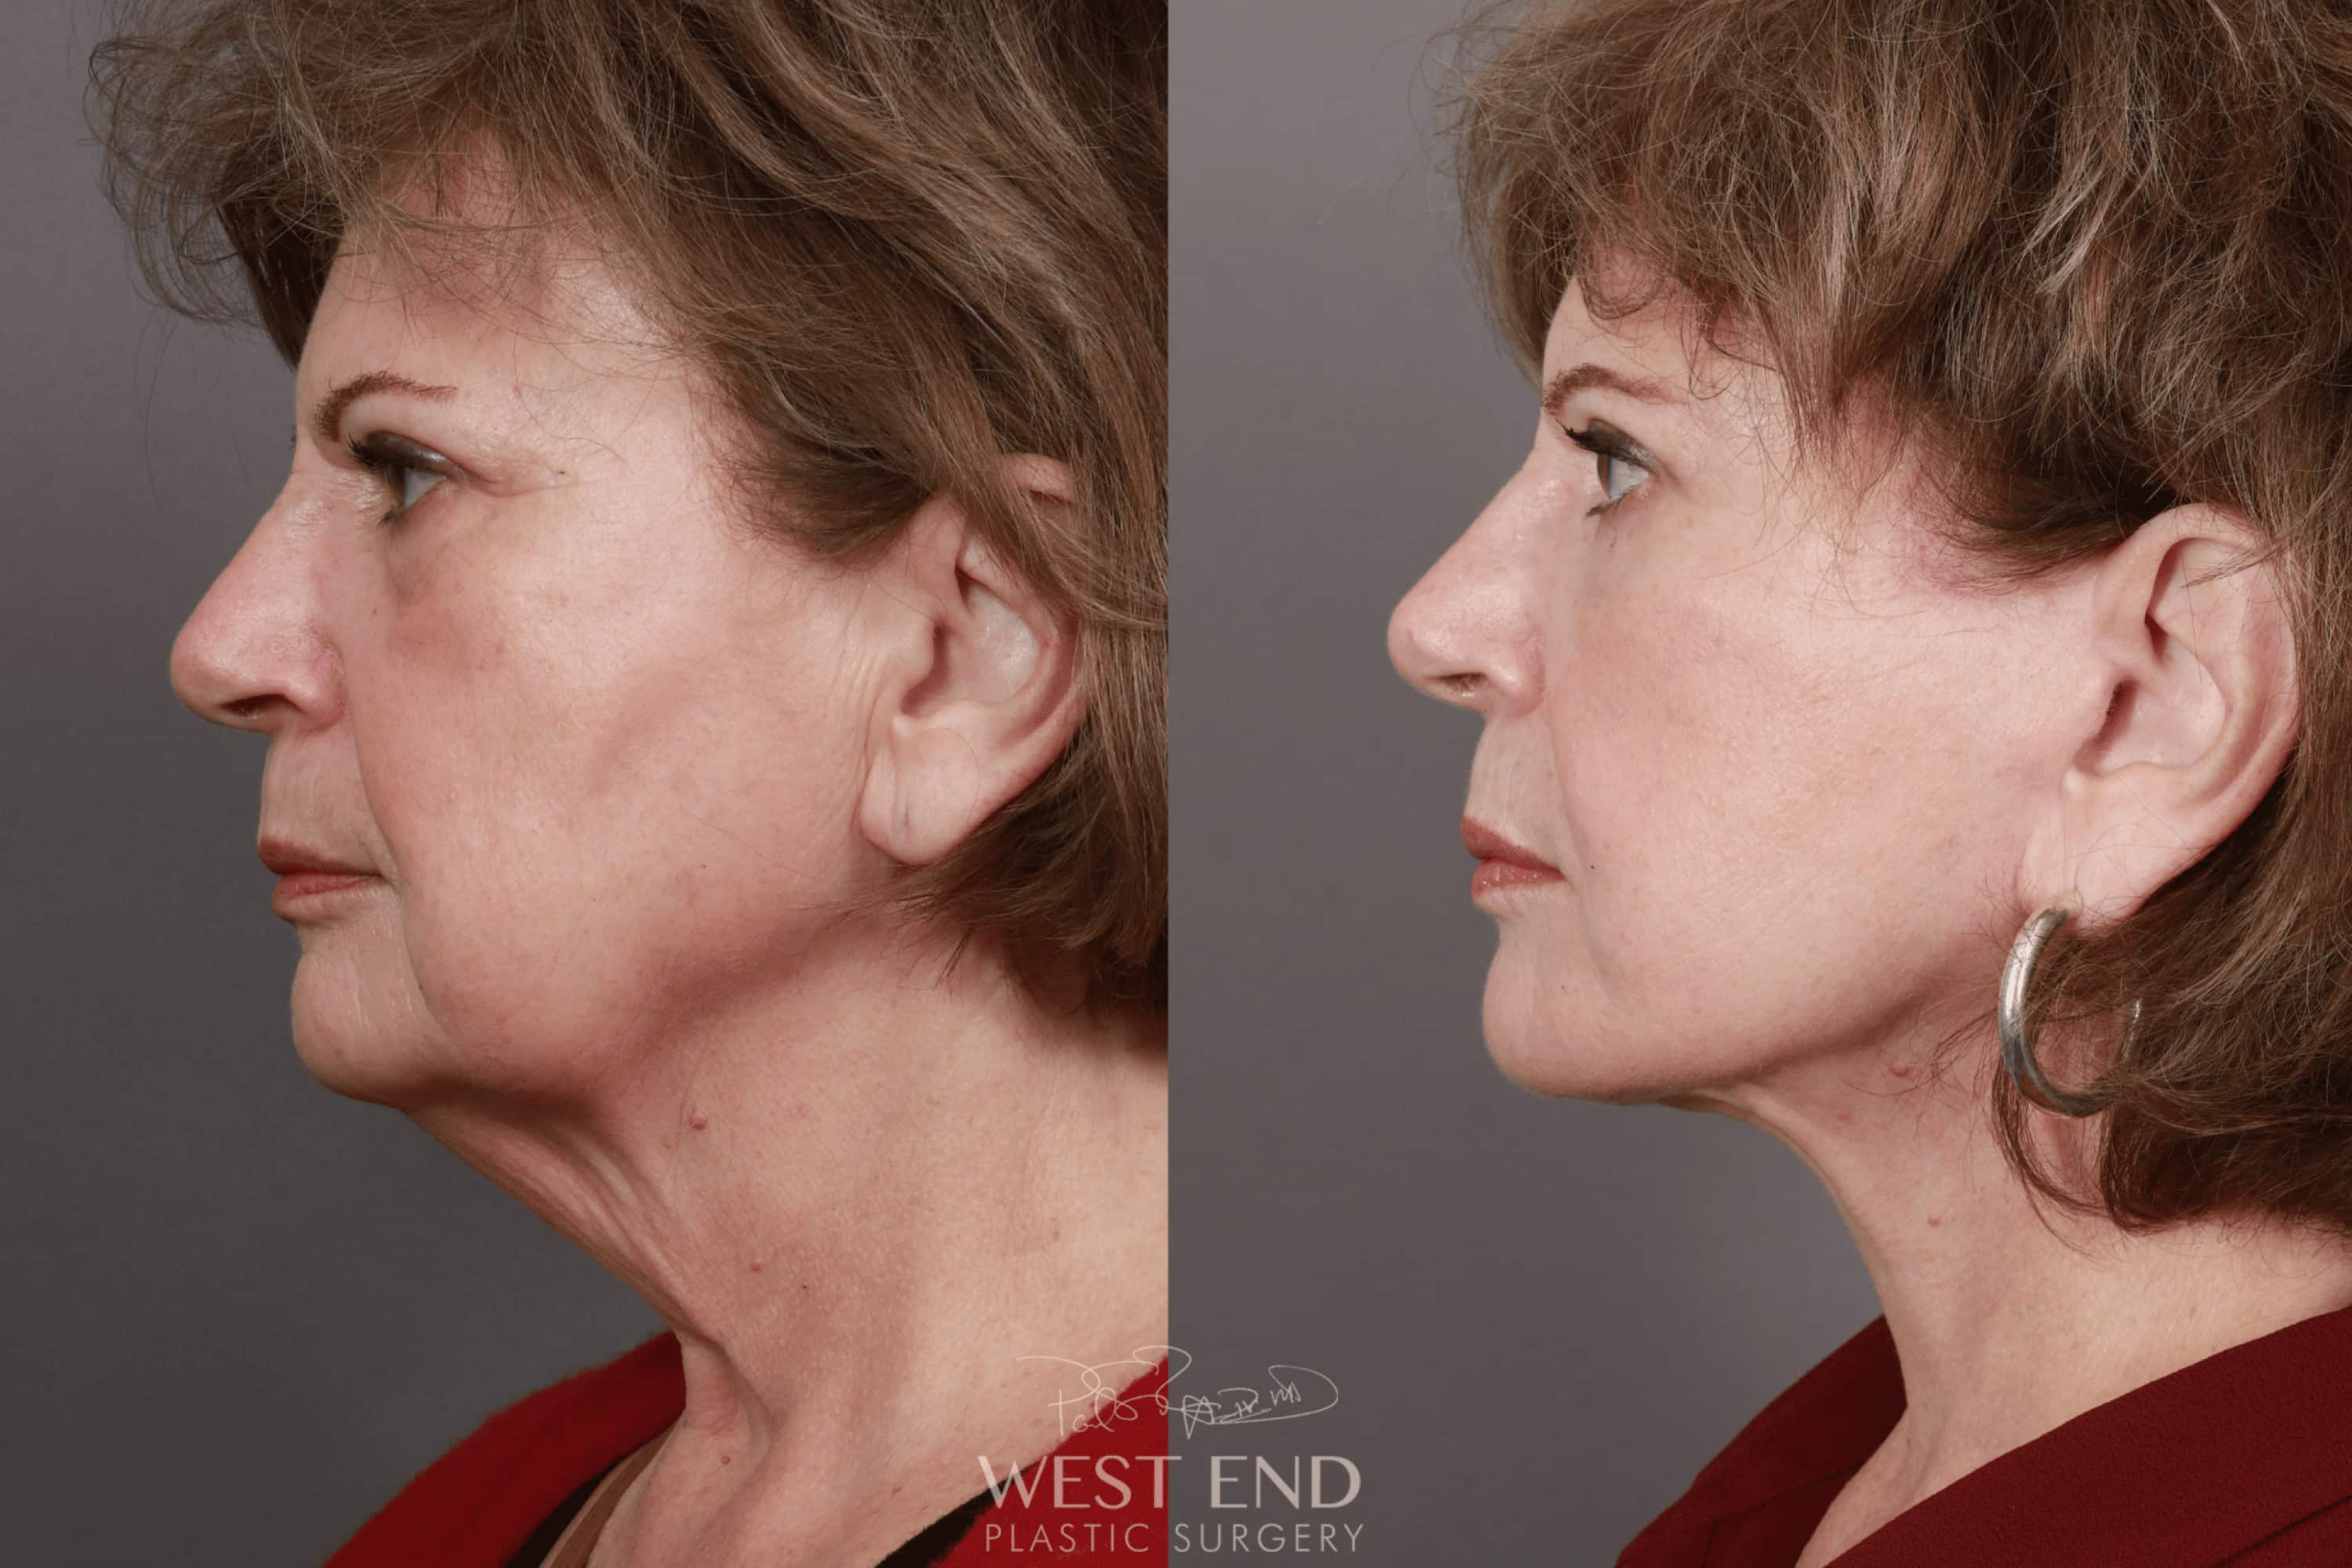 Deep Plane Facelift & Neck Lift, Brow Lift, Eyelid Lift, Fat Grafting, and CO2 Resurfacing (5 Months Post-Op)